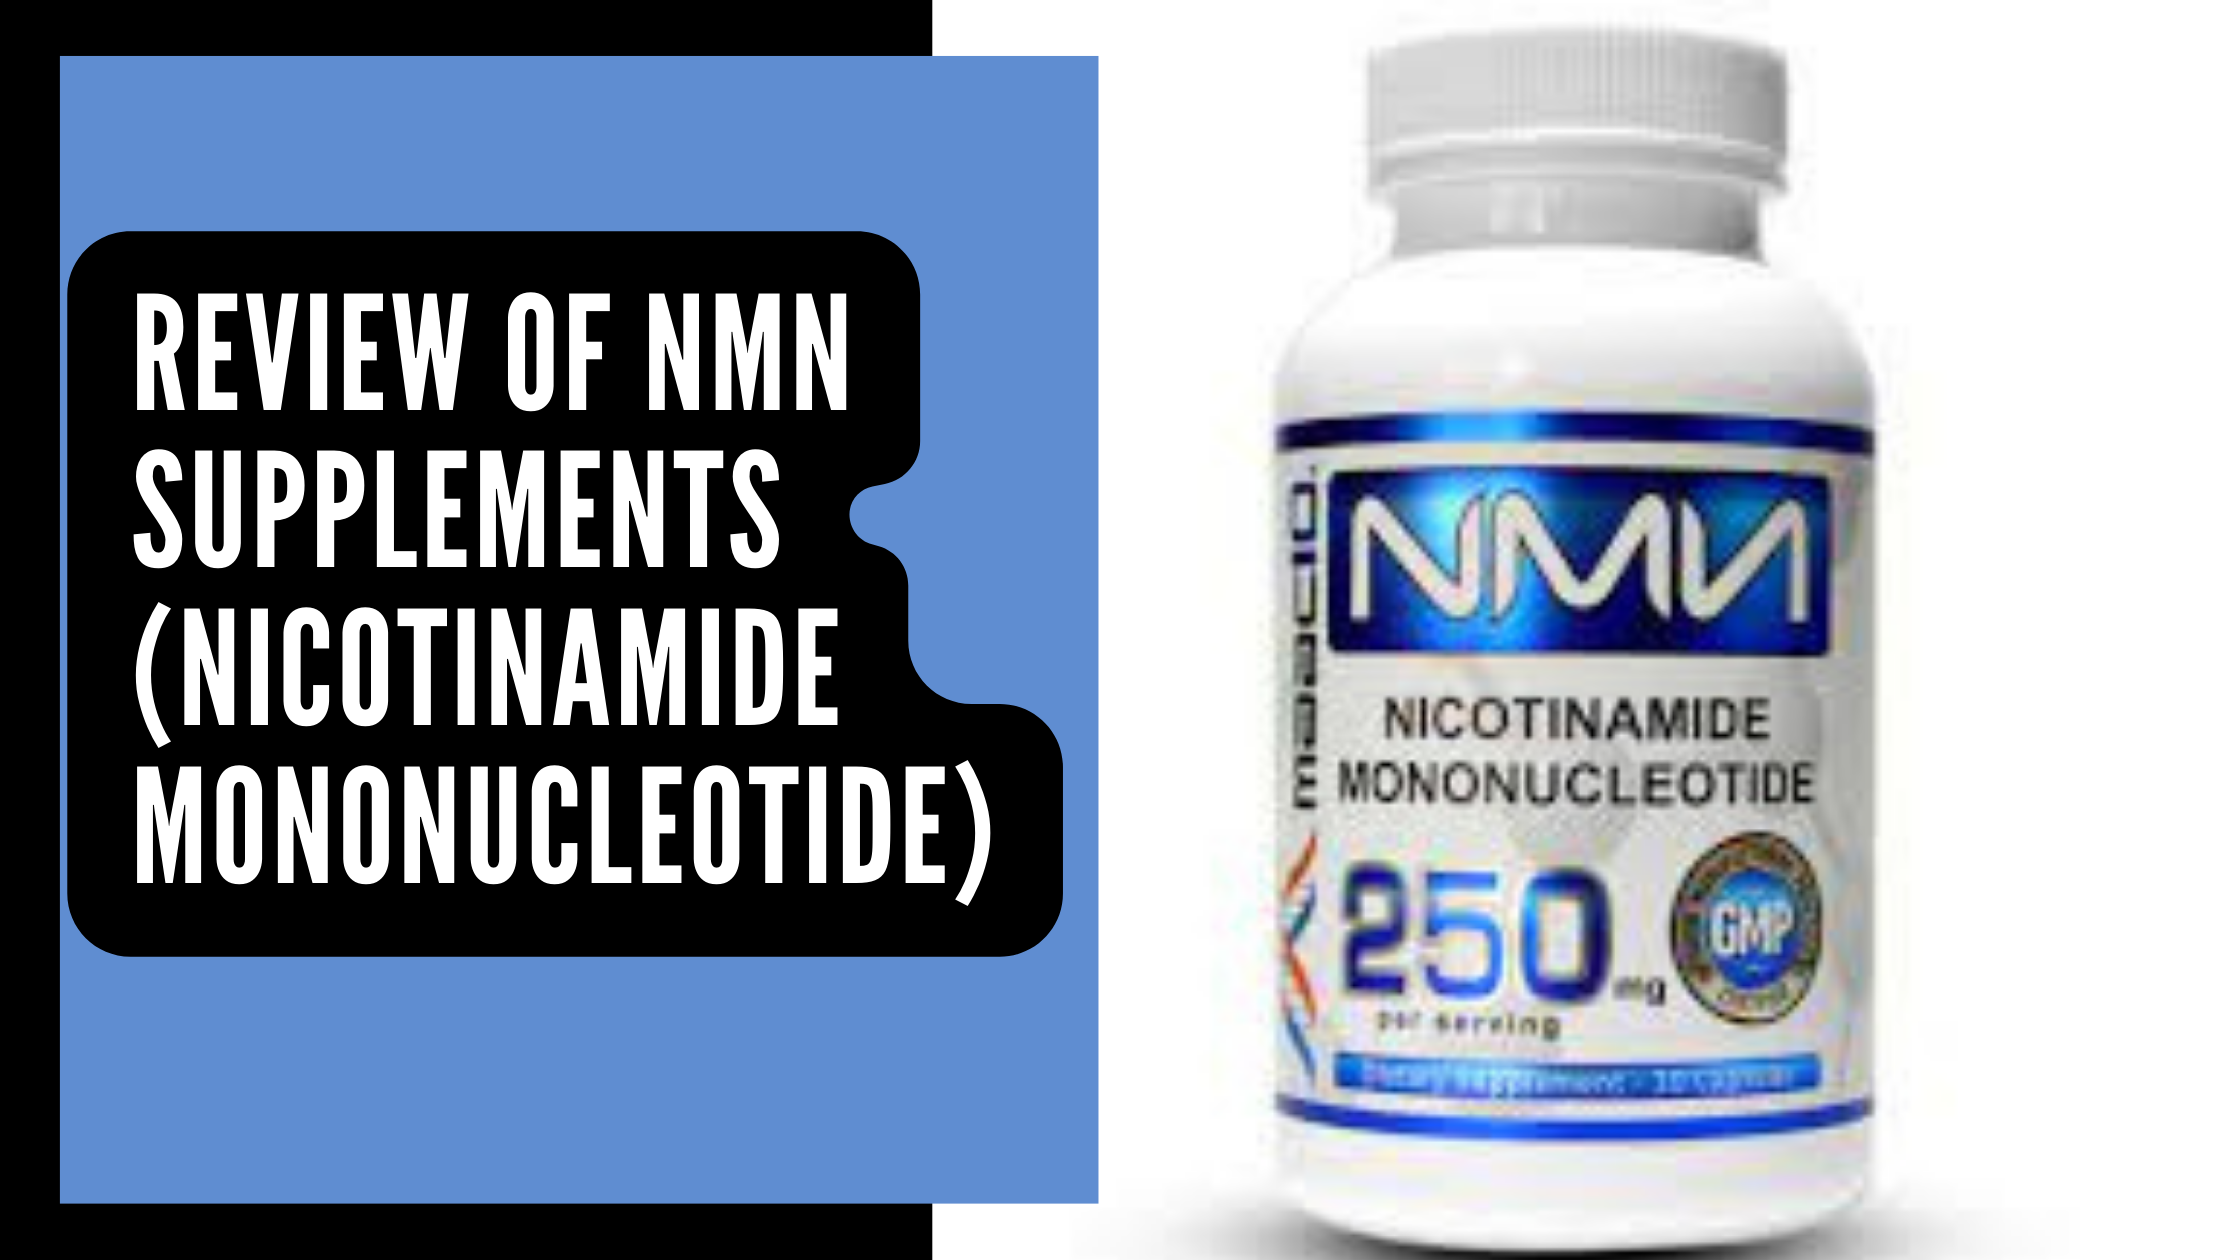 Review of NMN Supplements (Nicotinamide Mononucleotide)